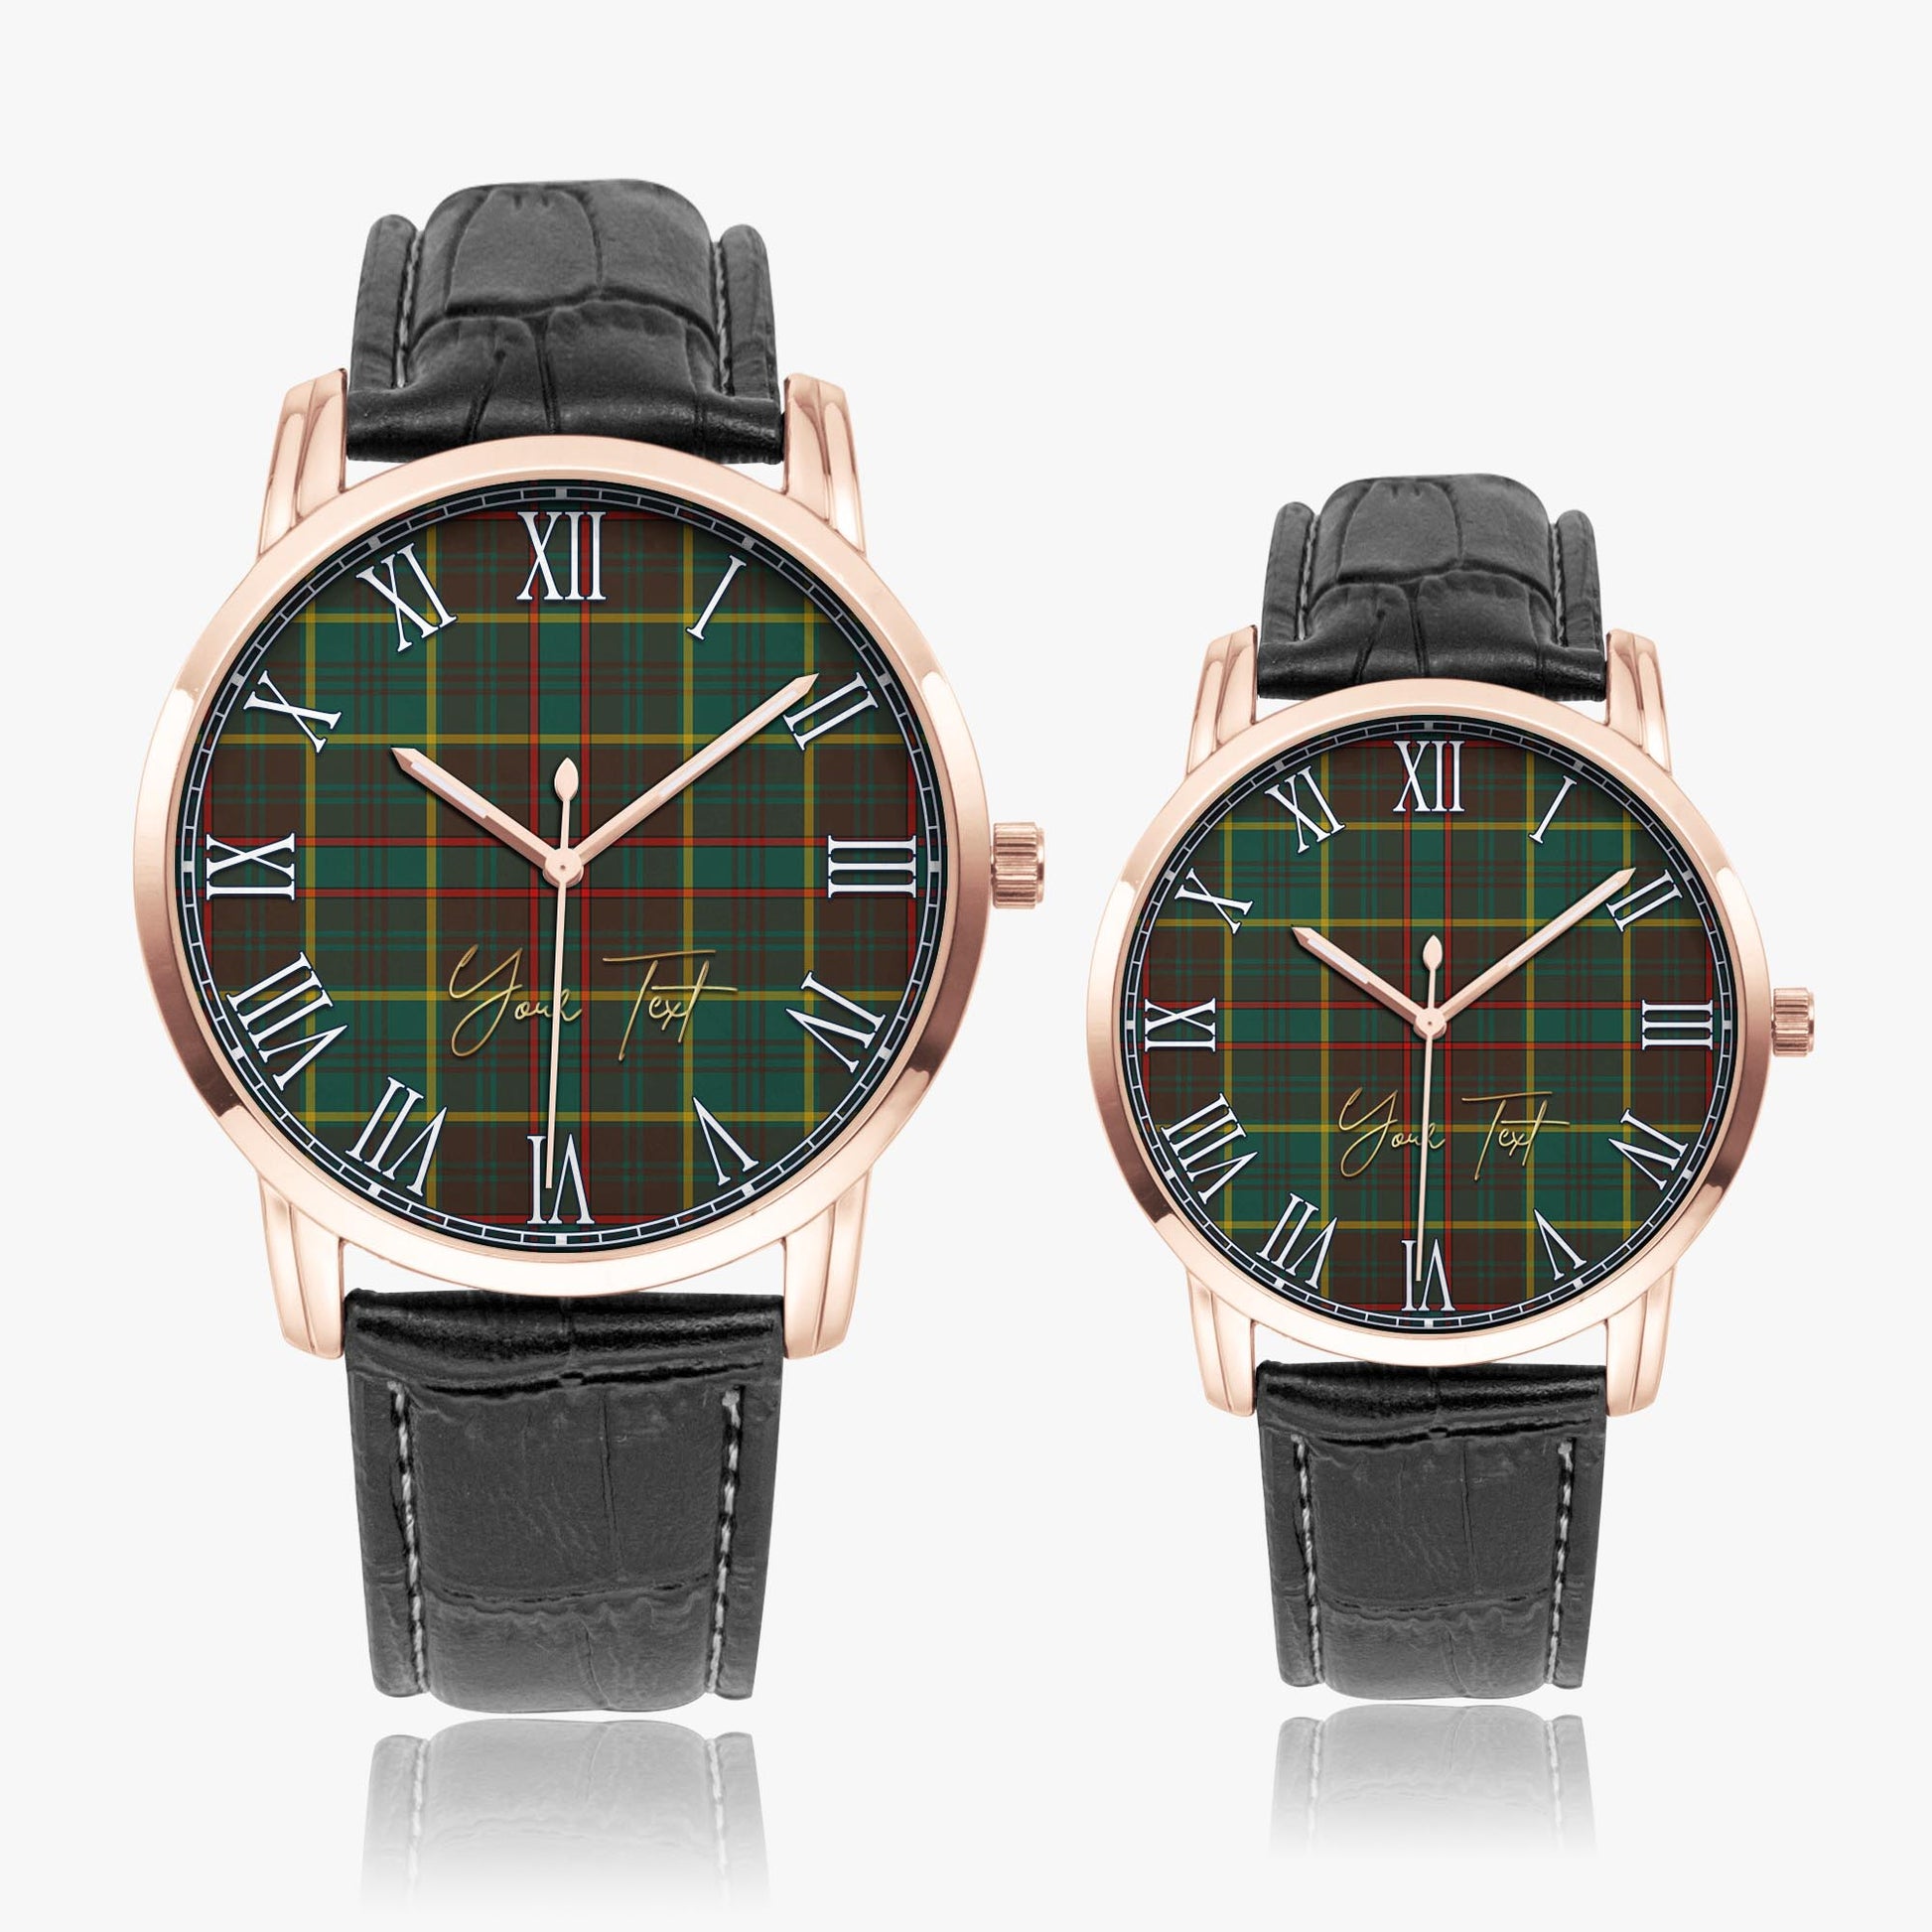 Ontario Province Canada Tartan Personalized Your Text Leather Trap Quartz Watch Wide Type Rose Gold Case With Black Leather Strap - Tartanvibesclothing